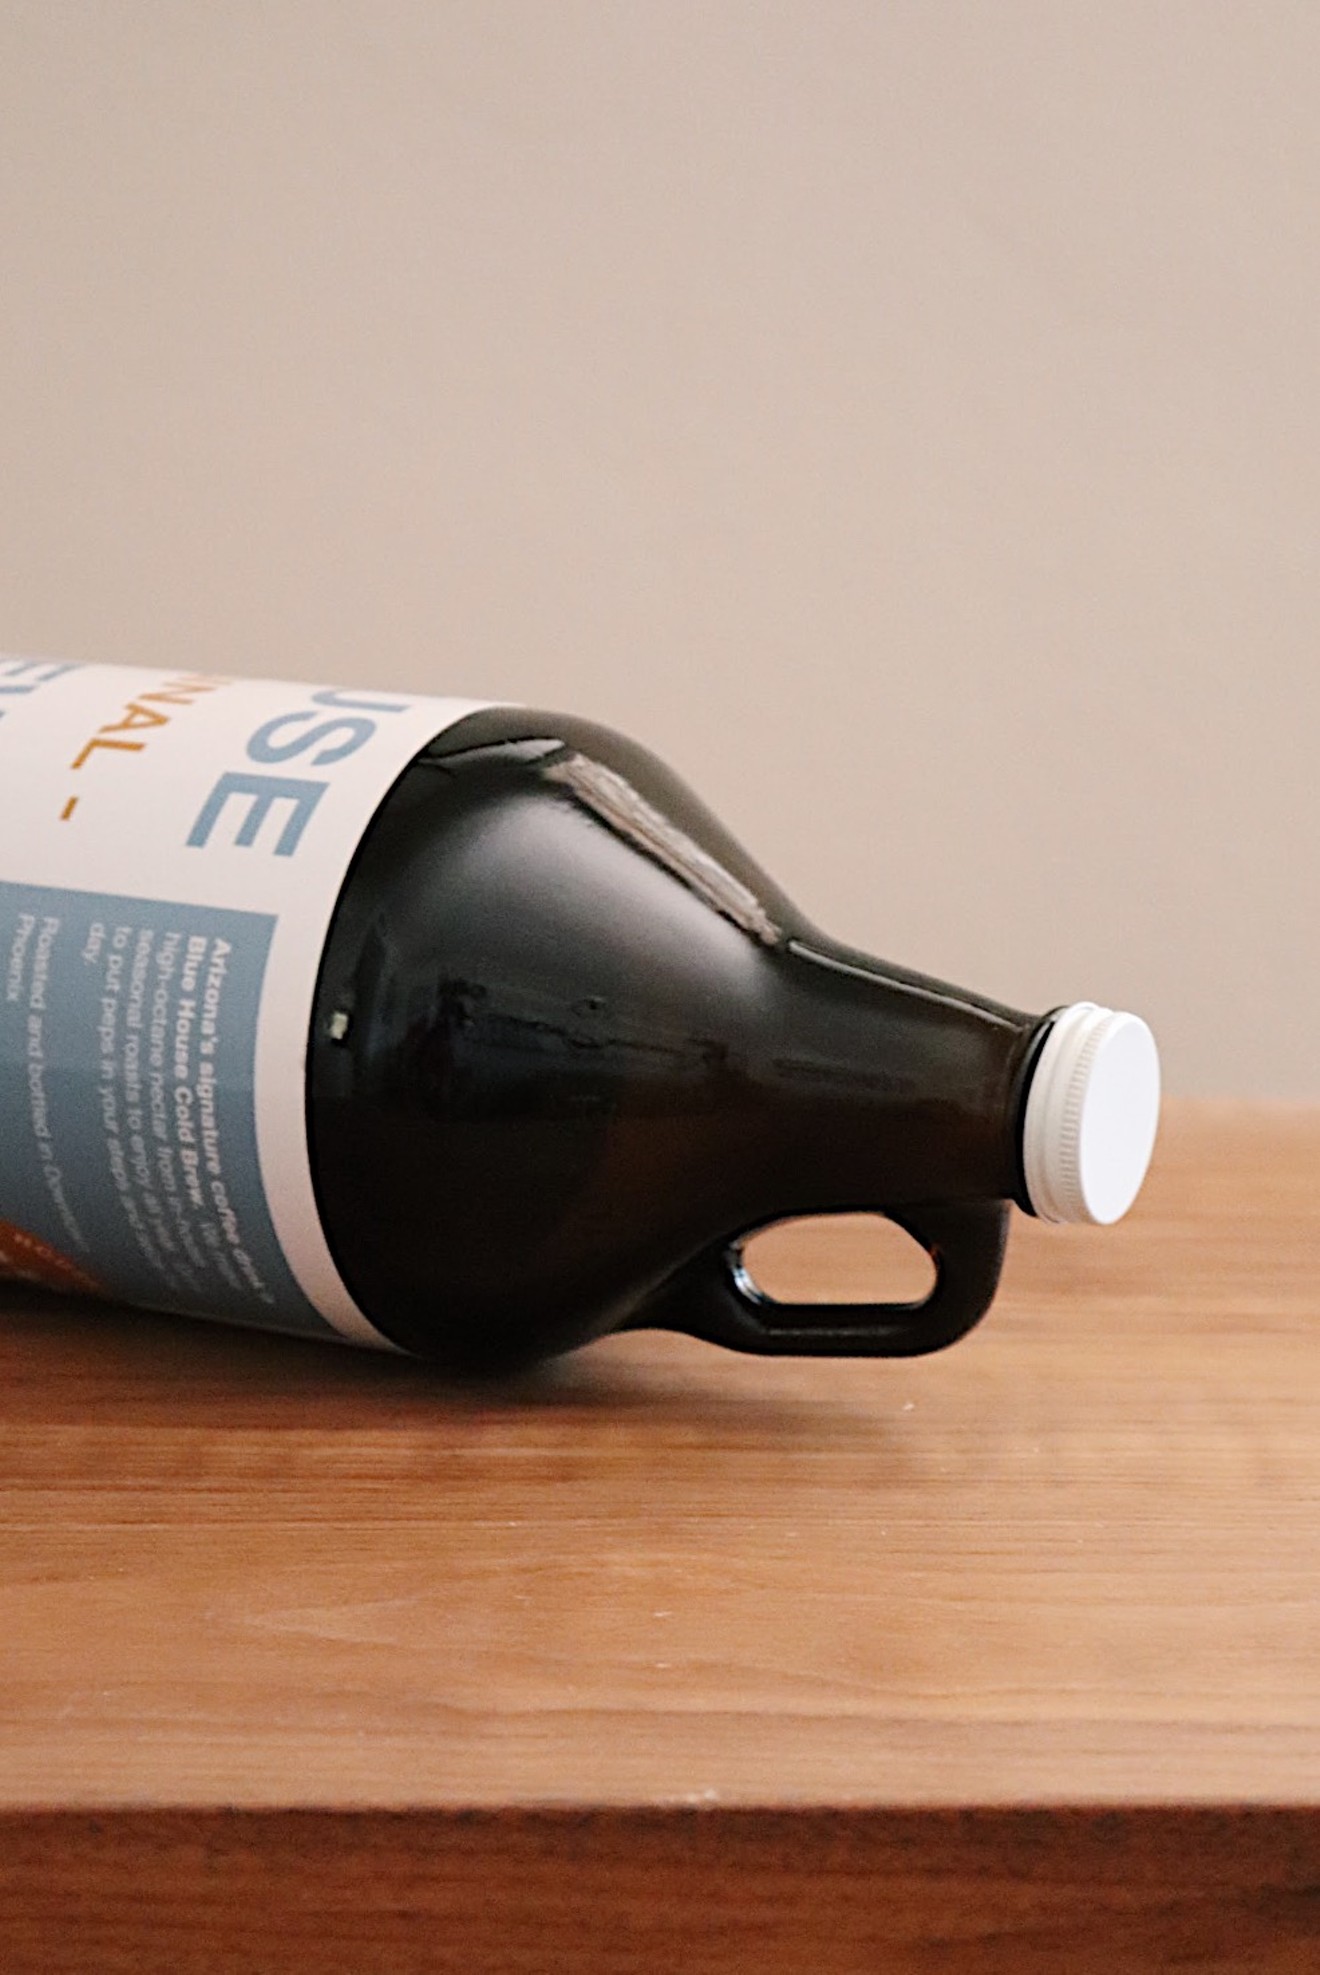 Cold brew can be delivered to your home on a weekly or bi-weekly basis.